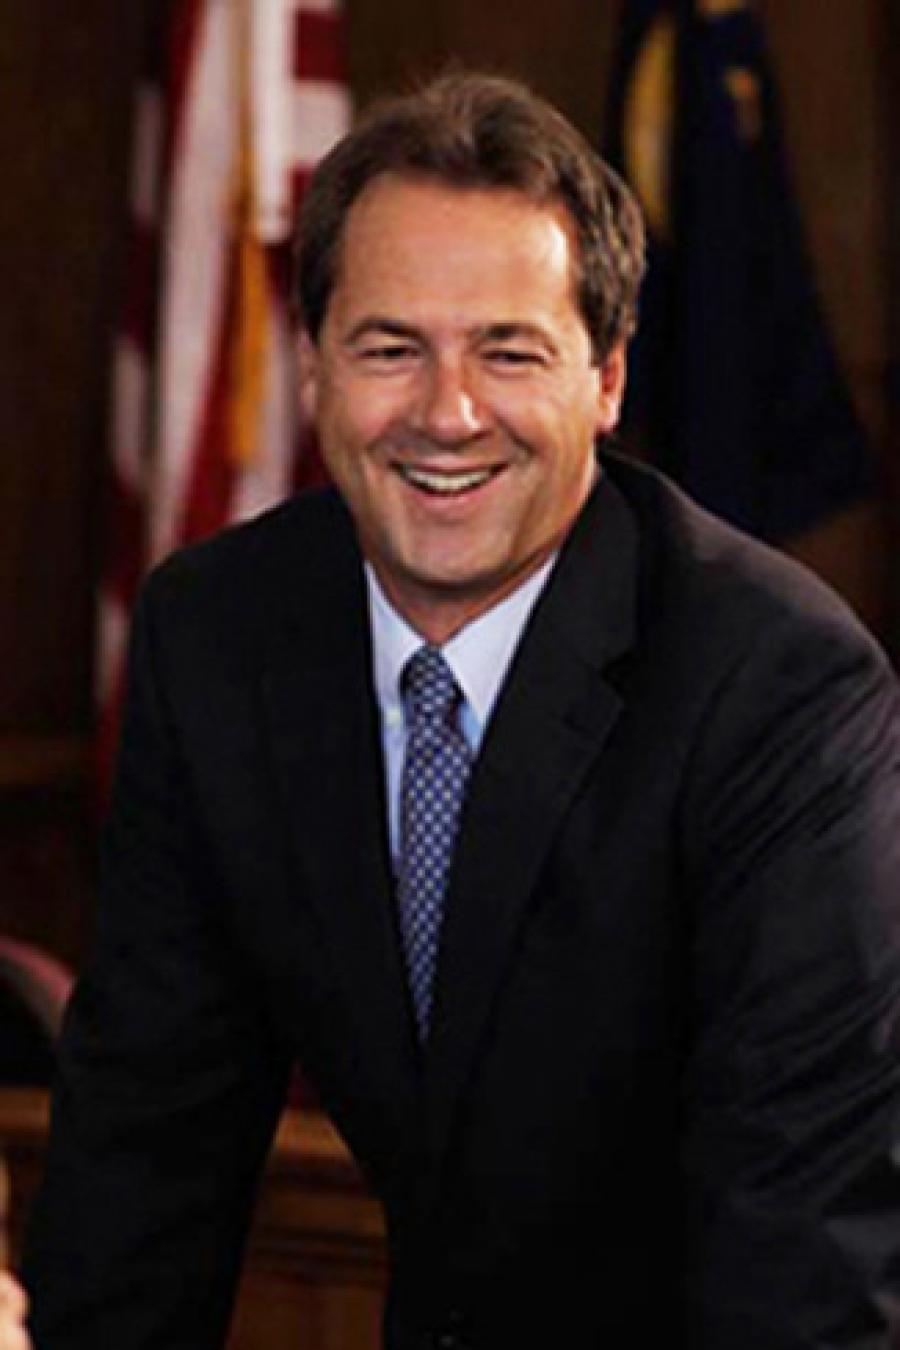 Gov. Steve Bullock urged the Legislature to pass the $290 million infrastructure package that includes $160 million in bonds for capital projects. 
(mt.gov photo)